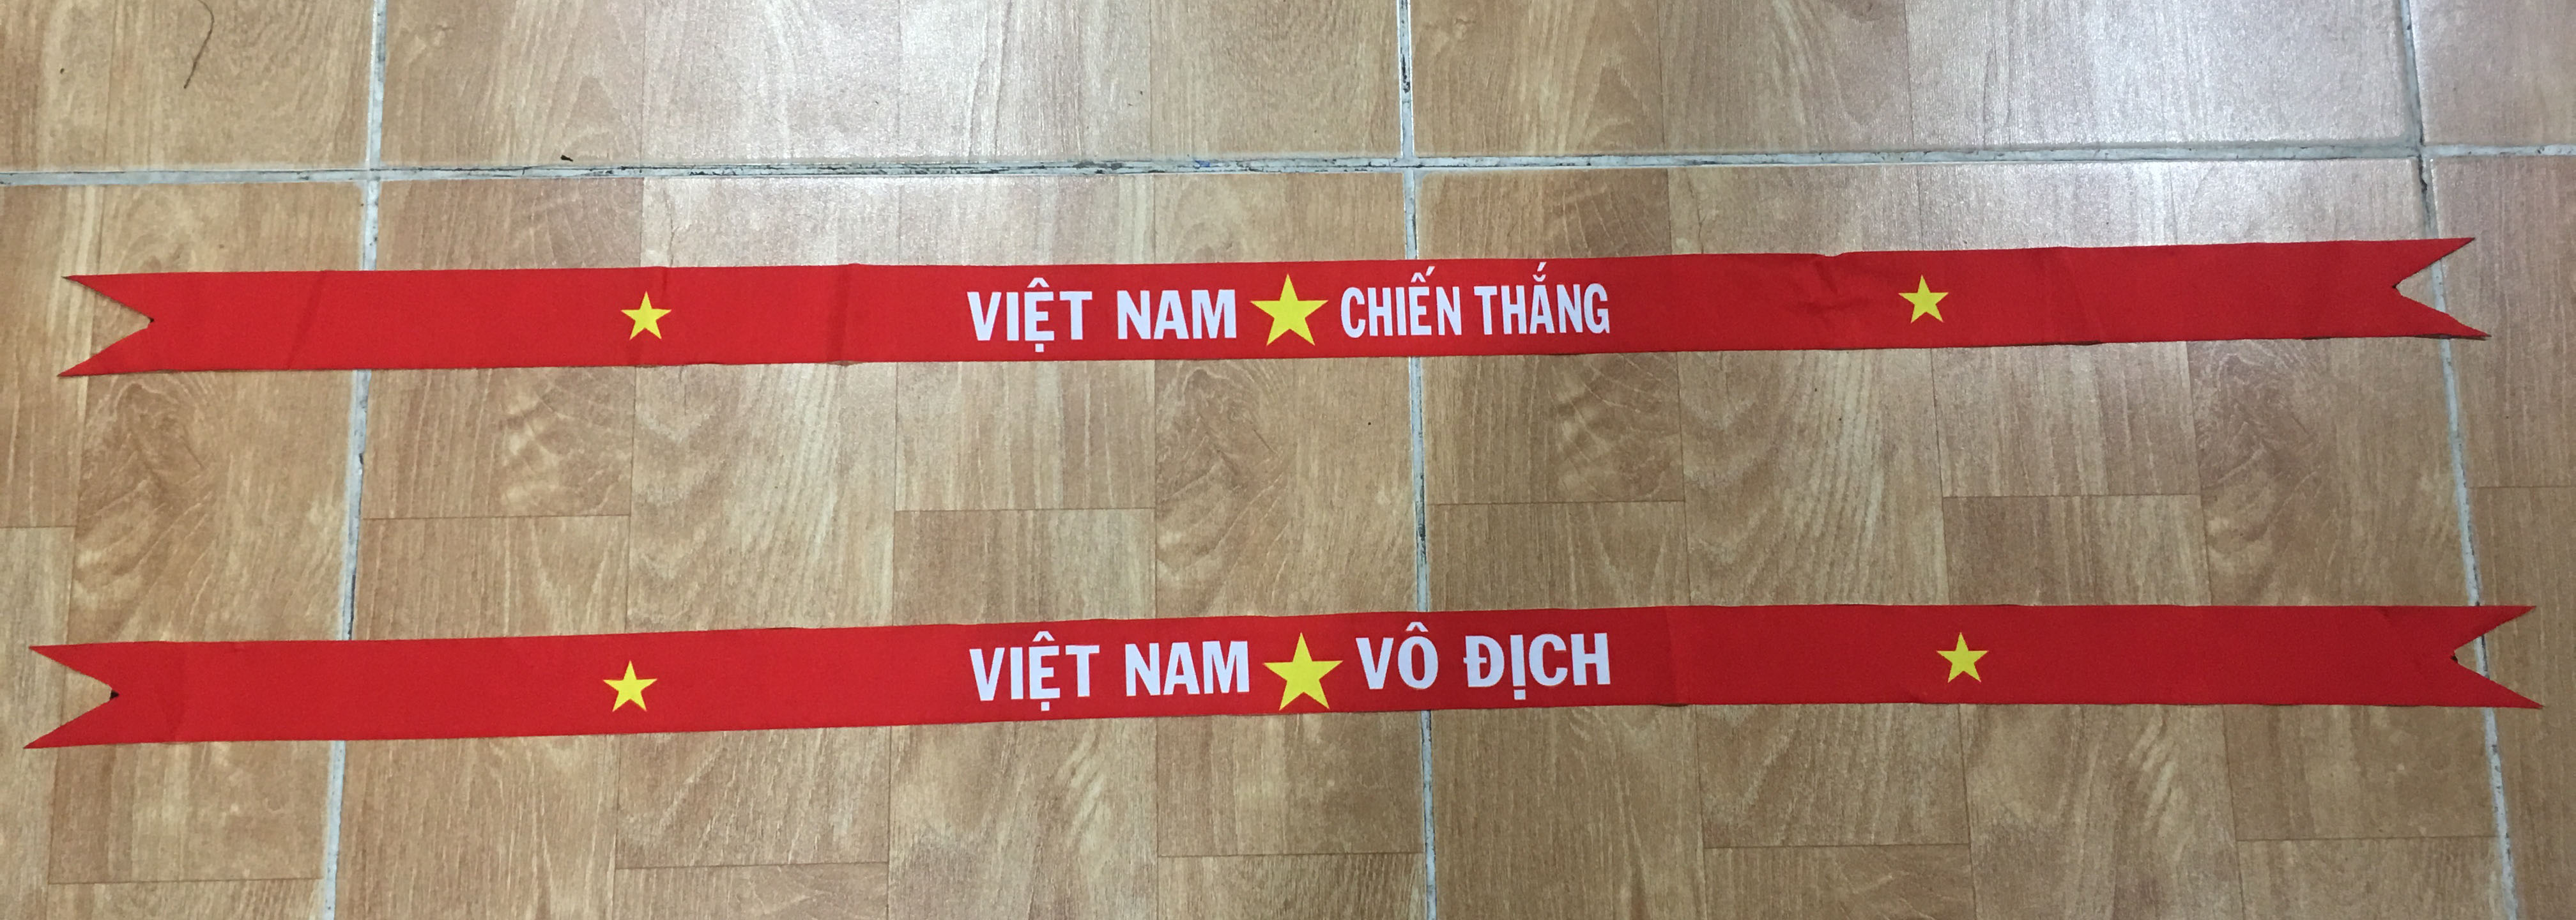 in cờ, may cờ, cờ cổ vũ